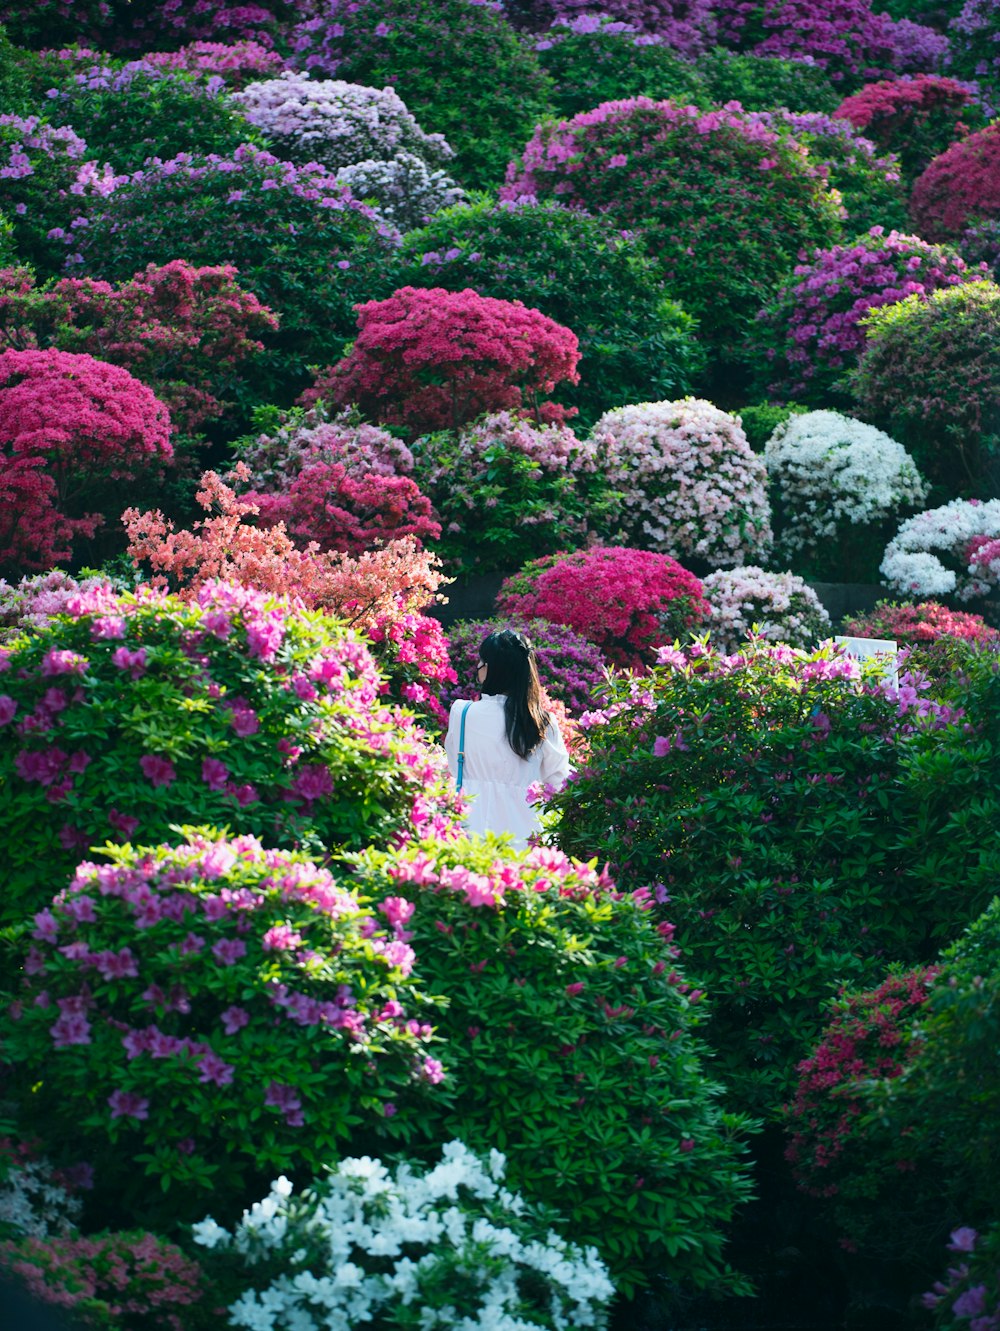 a person standing in a garden